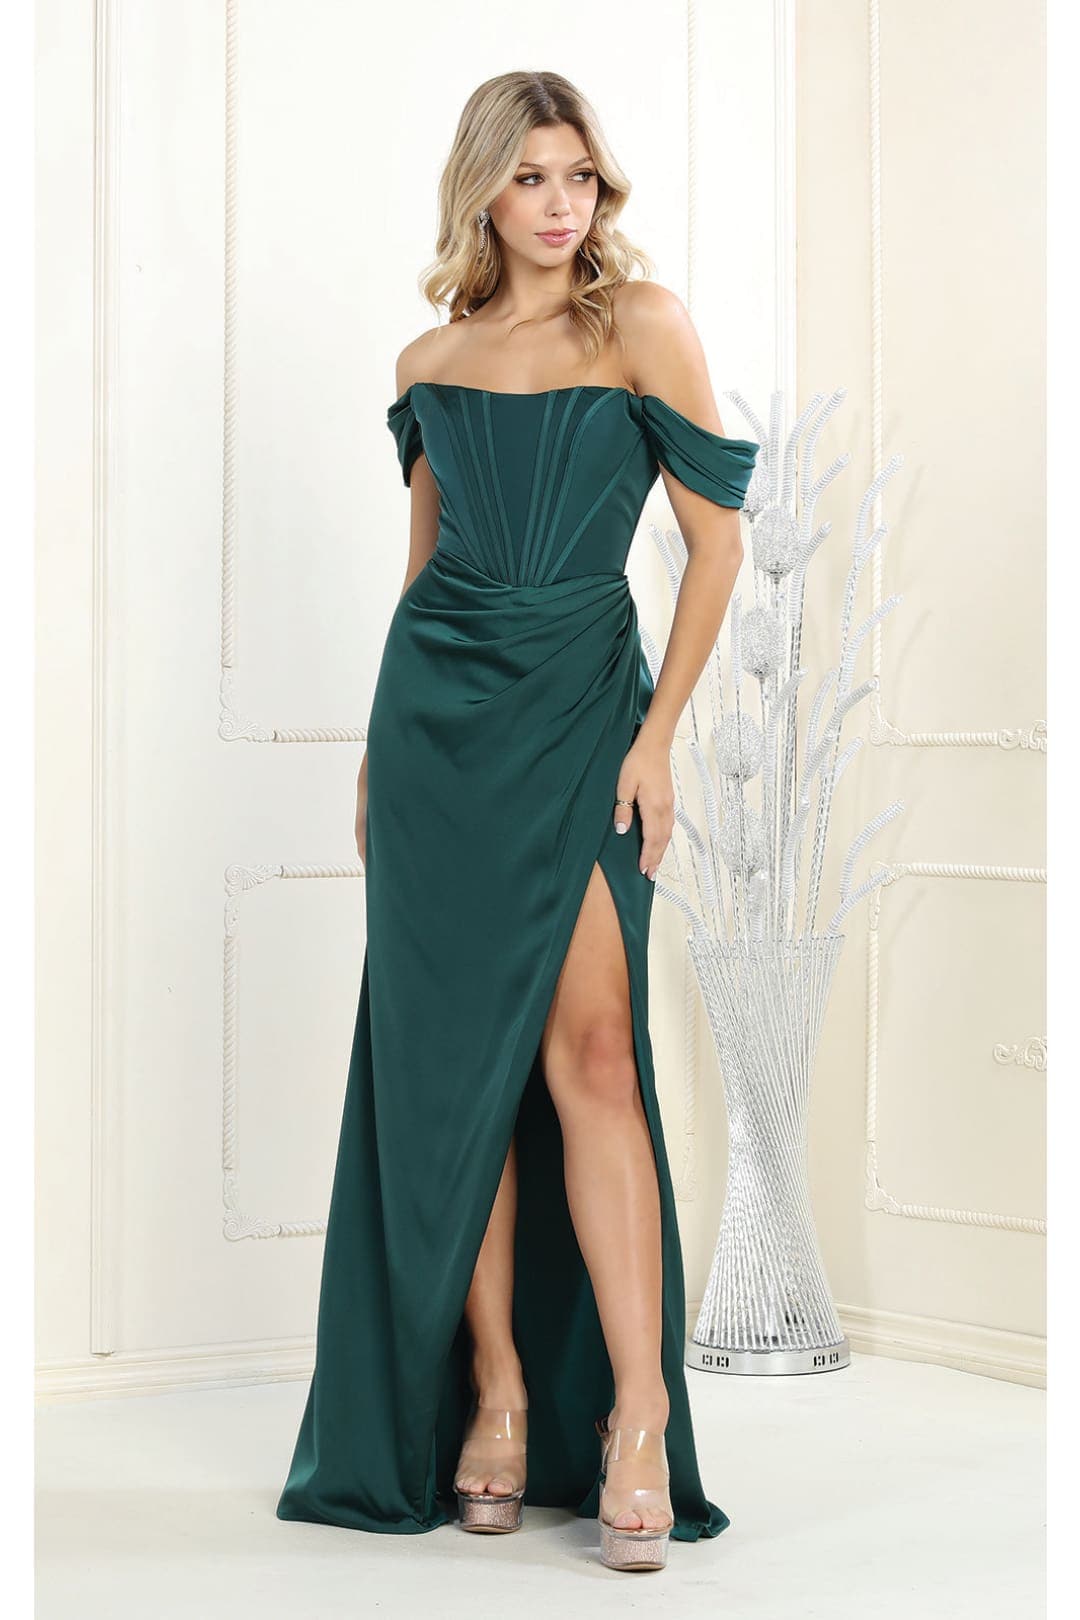 Formal Evening Simple Gown